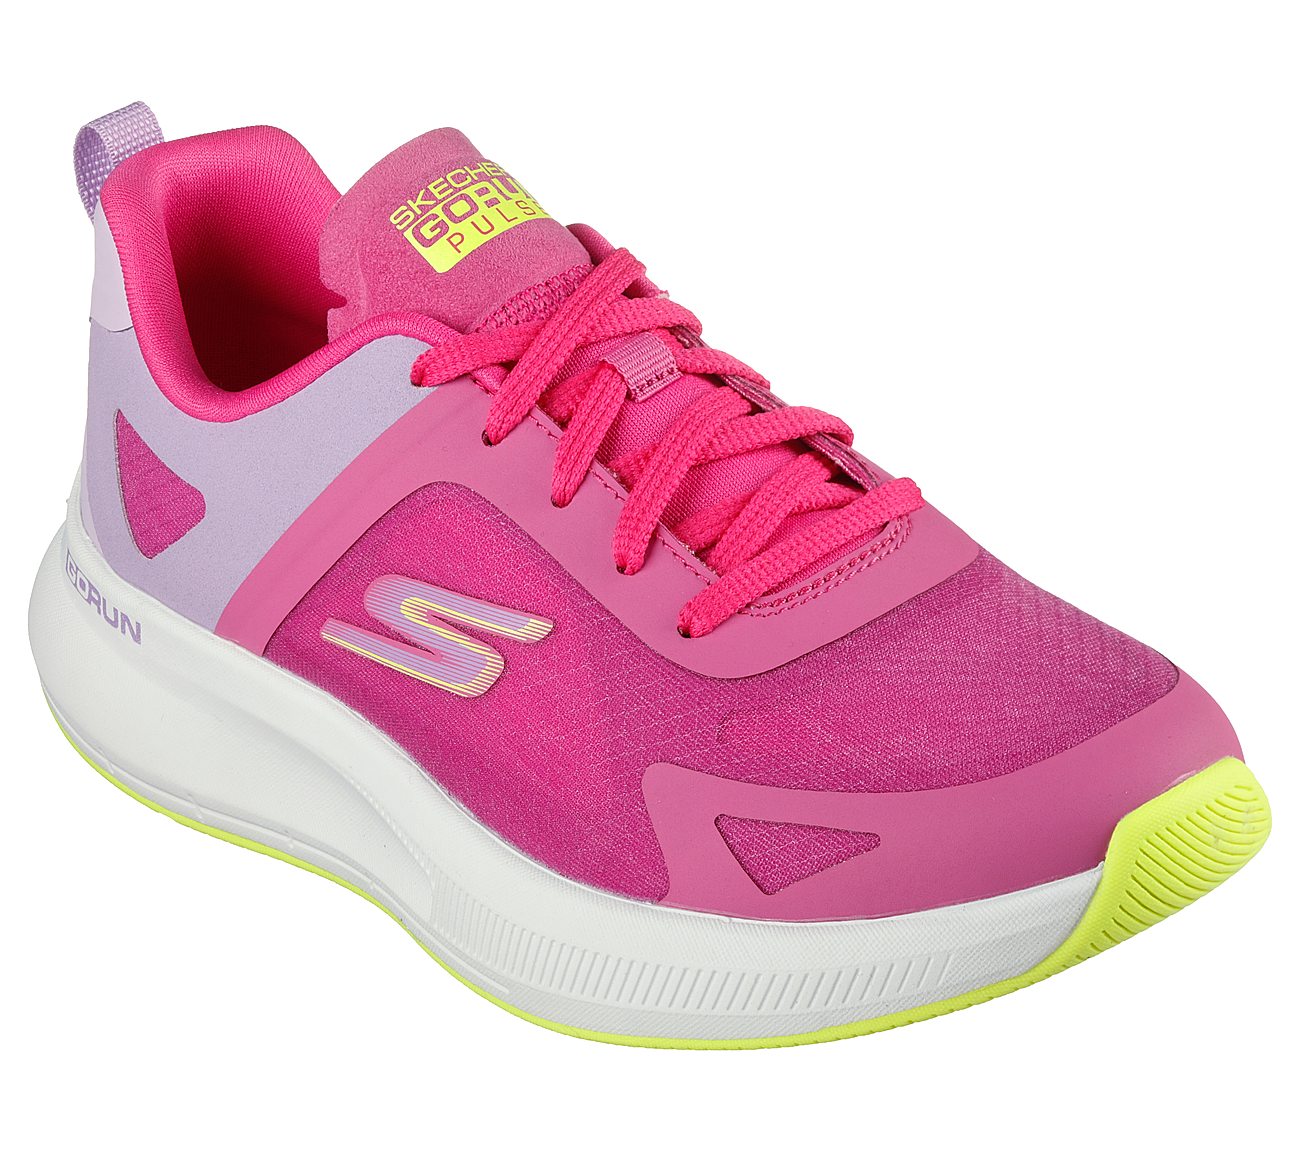 GO RUN PULSE - OPERATE, HOT PINK Footwear Lateral View